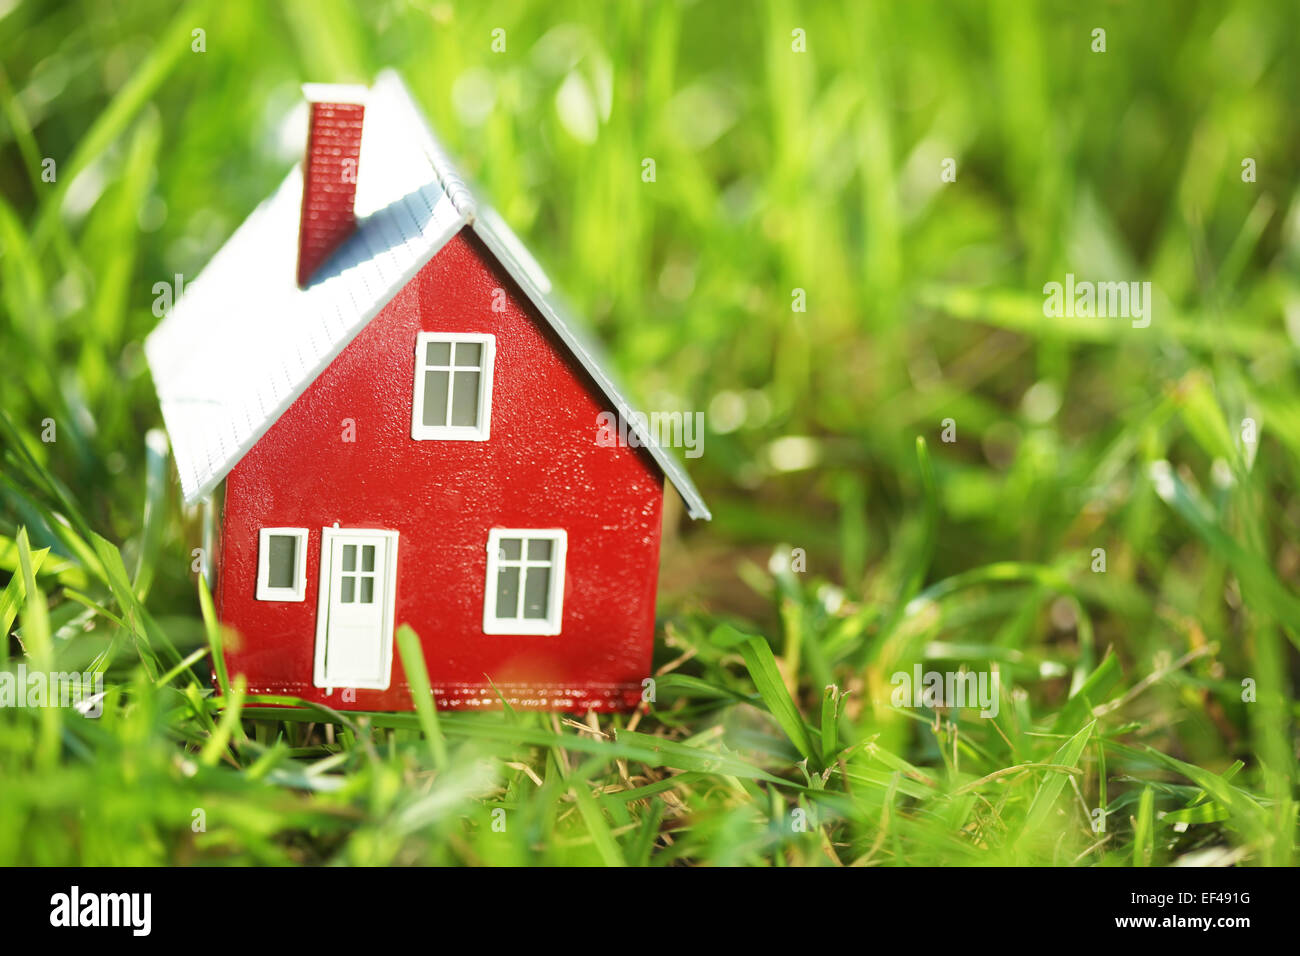 Tiny red house in green grass Stock Photo